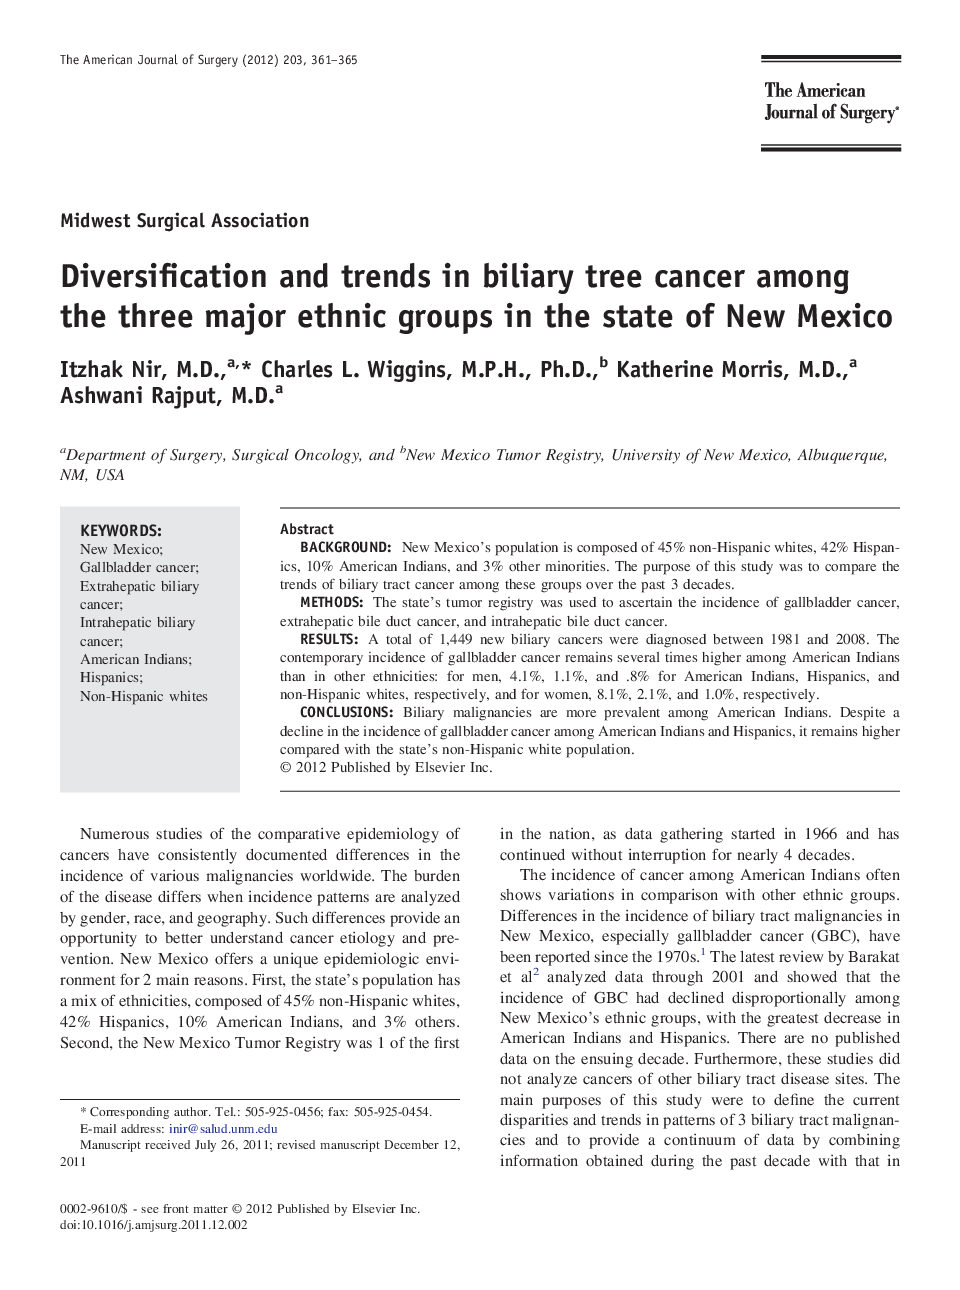 Diversification and trends in biliary tree cancer among the three major ethnic groups in the state of New Mexico